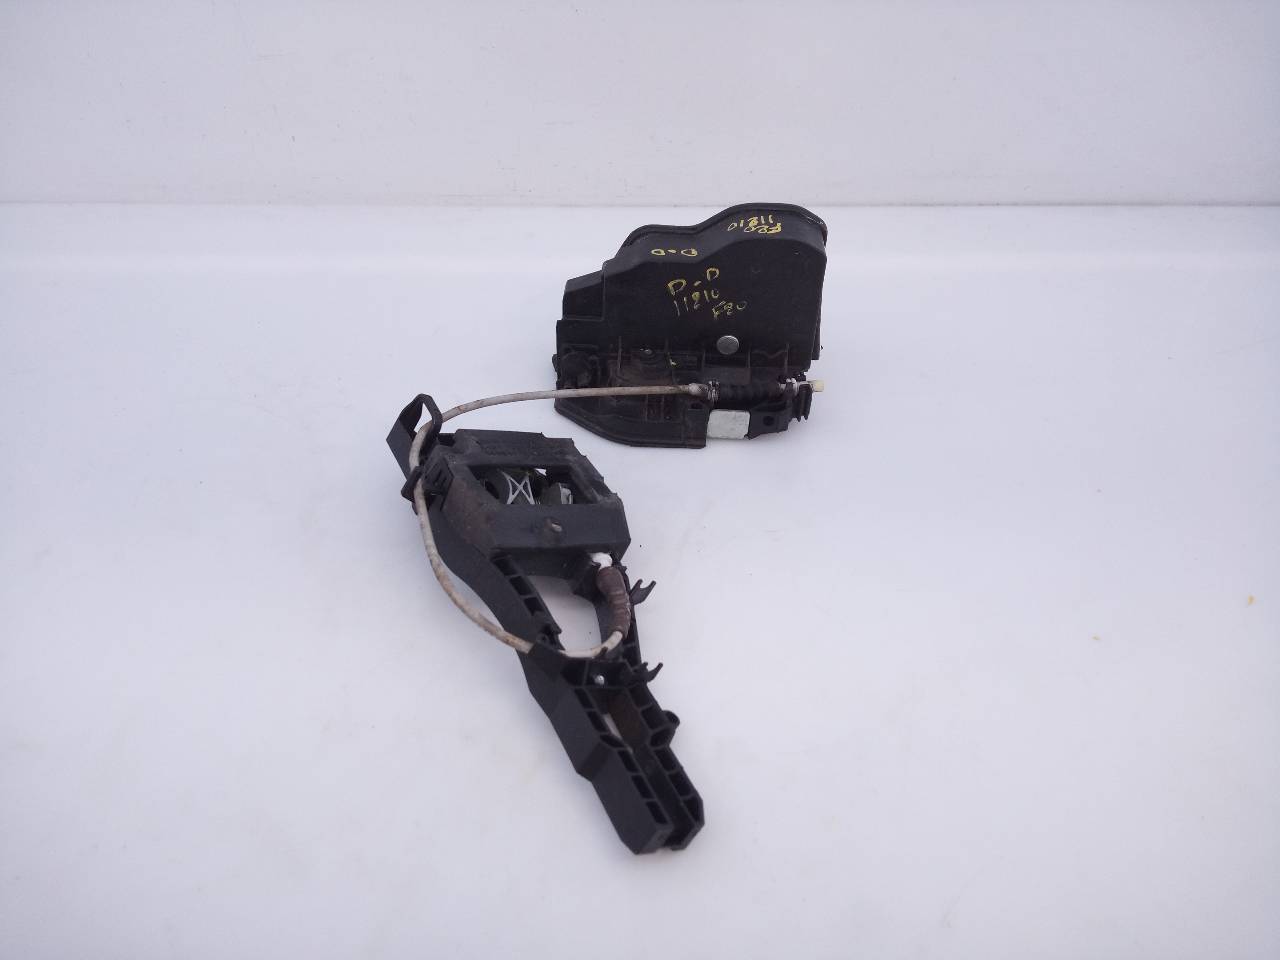 BMW 1 Series F20/F21 (2011-2020) Front Right Door Lock 7202146, E1-A3-40-1 21821801